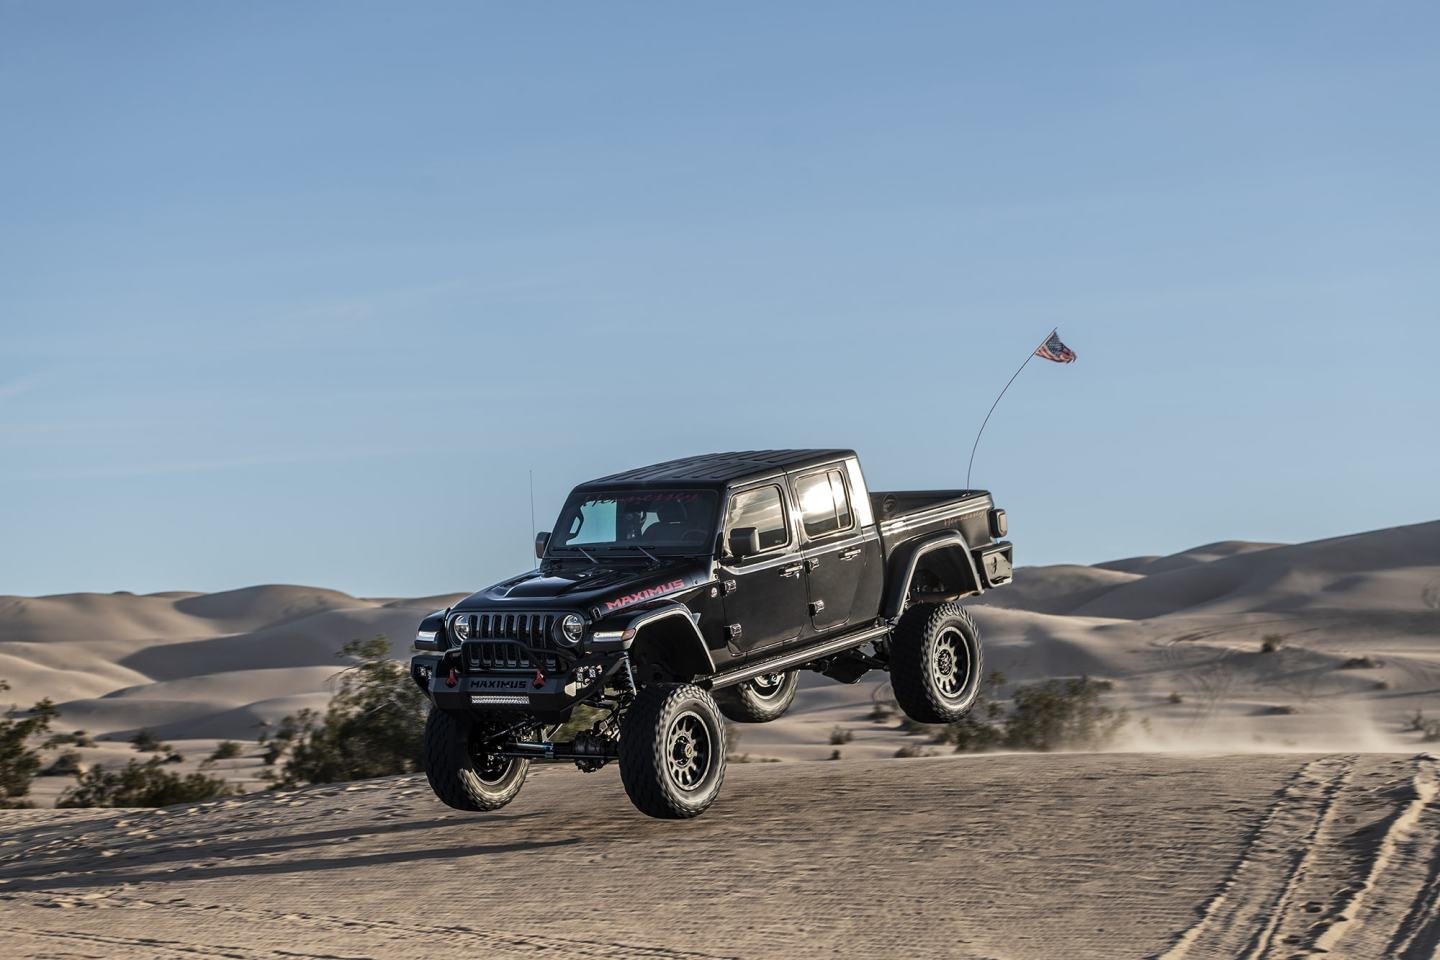 Video: This 1,000hp Jeep Jumps Over Dunes